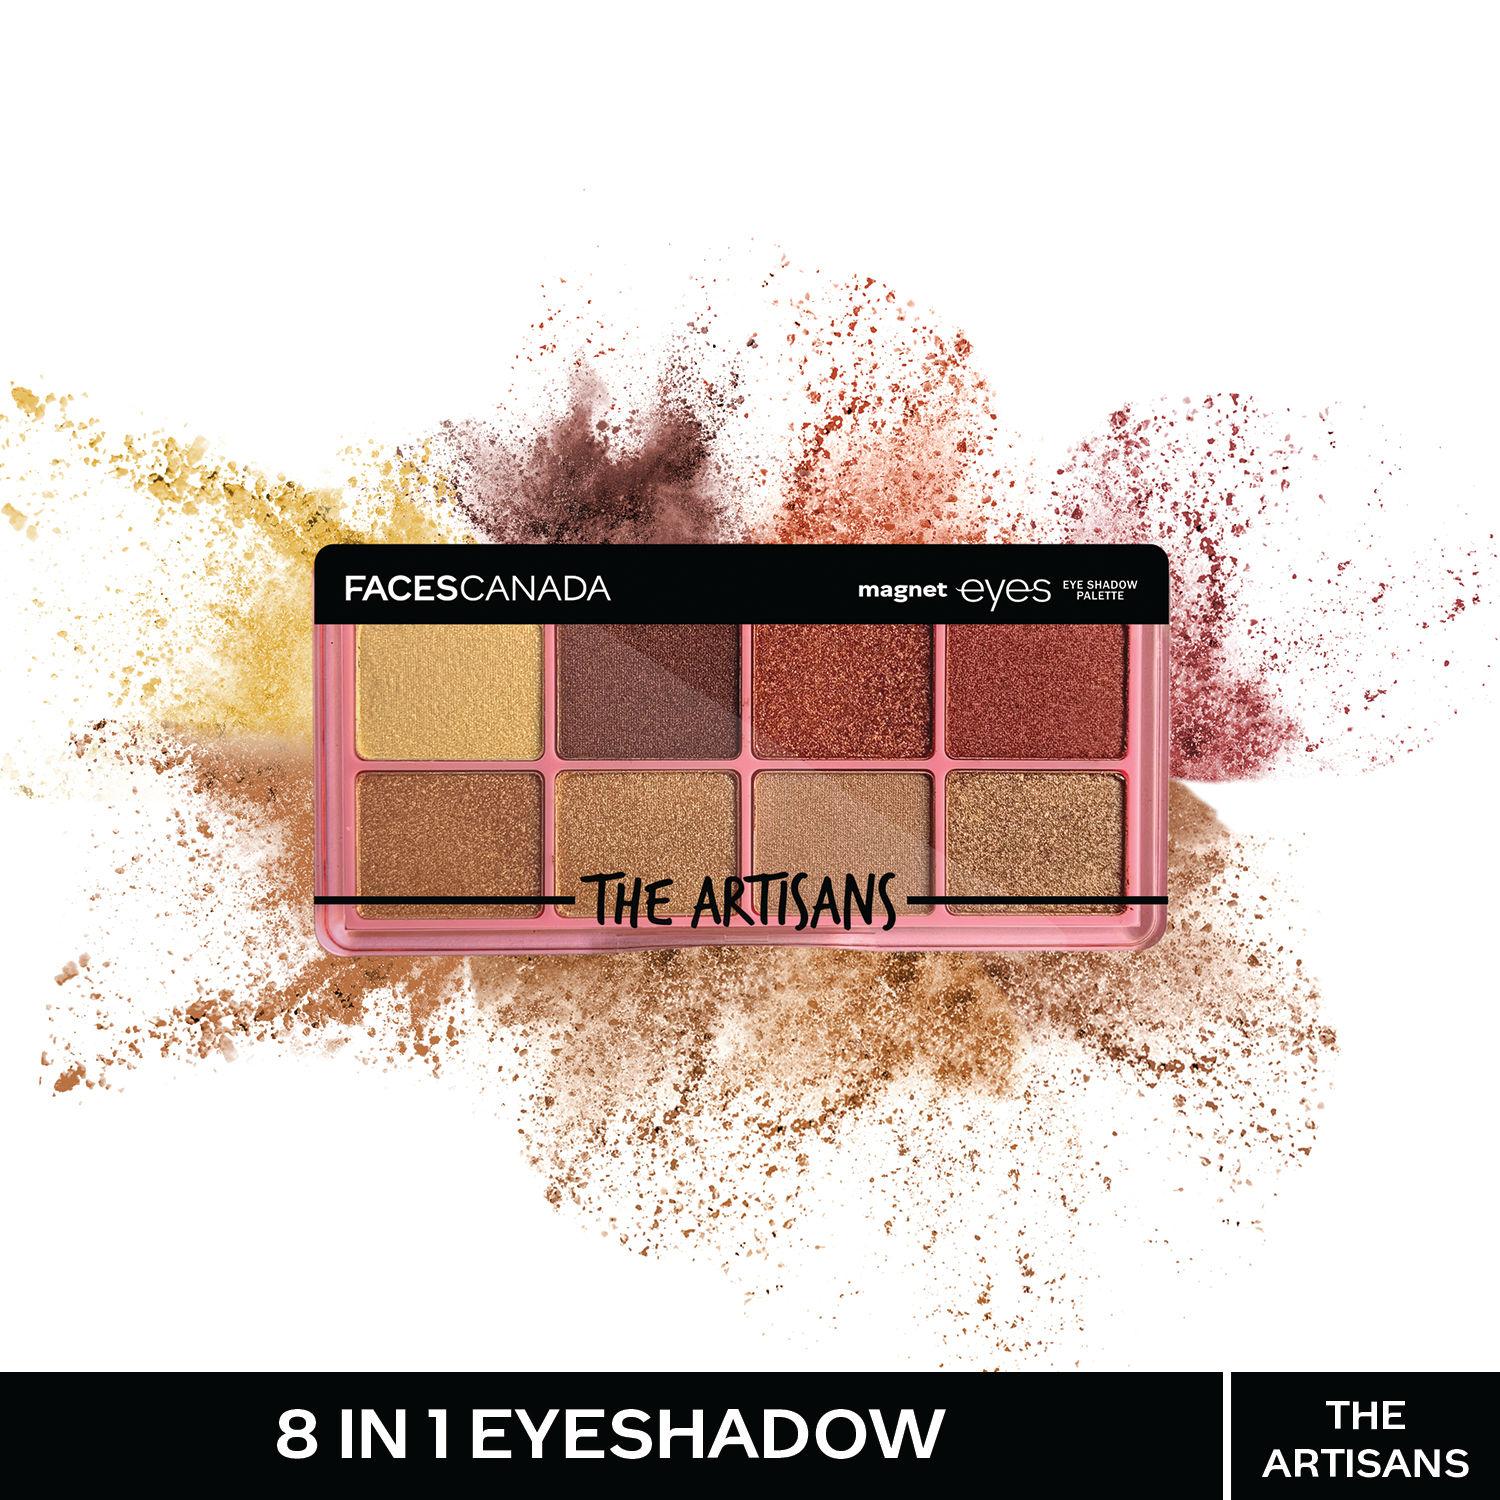 Buy FACES CANADA Magneteyes 8 in 1 Eyeshadow Palette - The Artisans, 6.4g | Shimmer & Matte Shades | Long Lasting & Intensely Pigmented | Buttery Soft Lightweight Texture | Smooth & Easily Blendable - Purplle